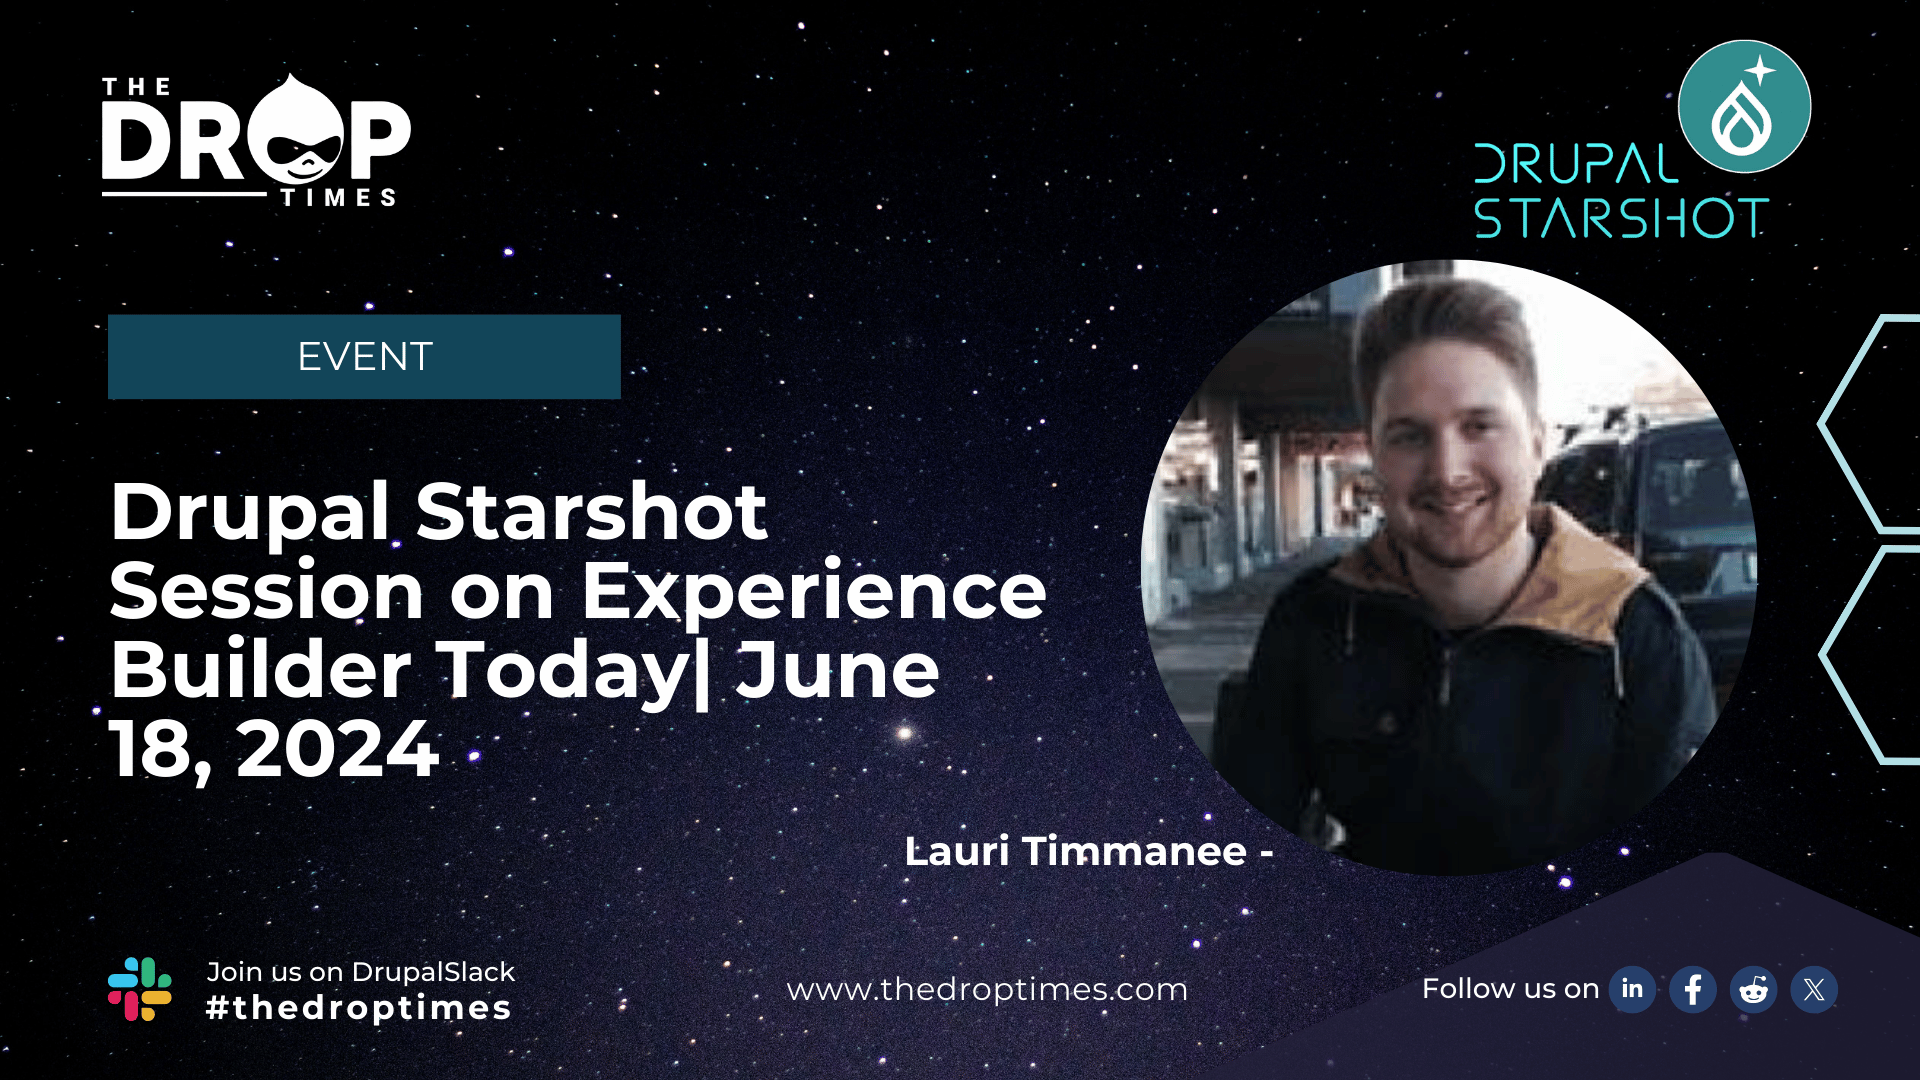 Drupal Starshot Session on Experience Builder Today June 18, 2024